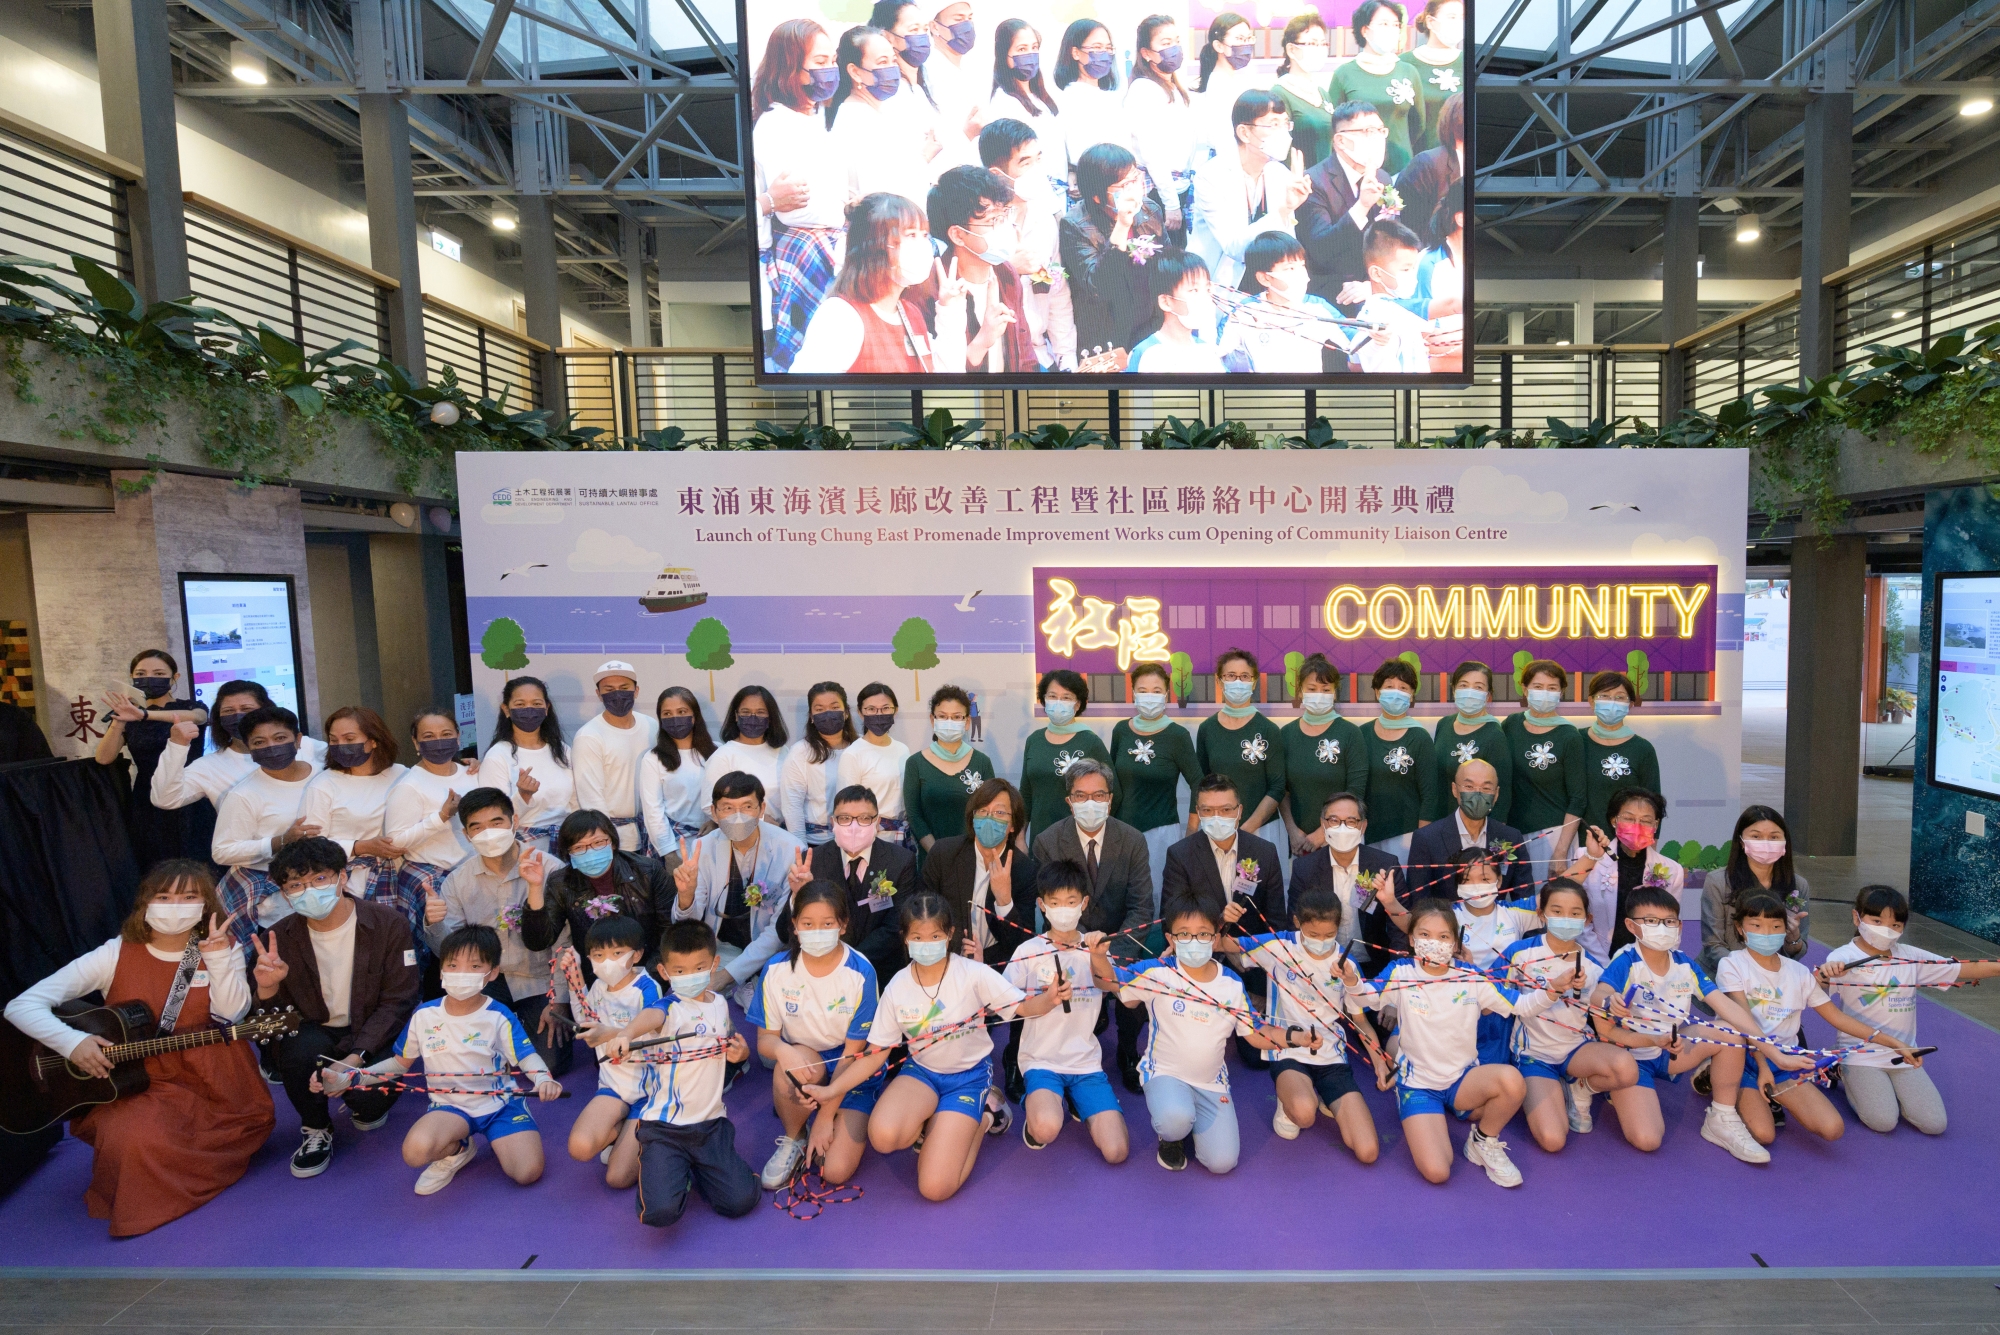 The centre serves as a new link for the Government to maintain its close connection with the community, building a sustainable Lantau together.